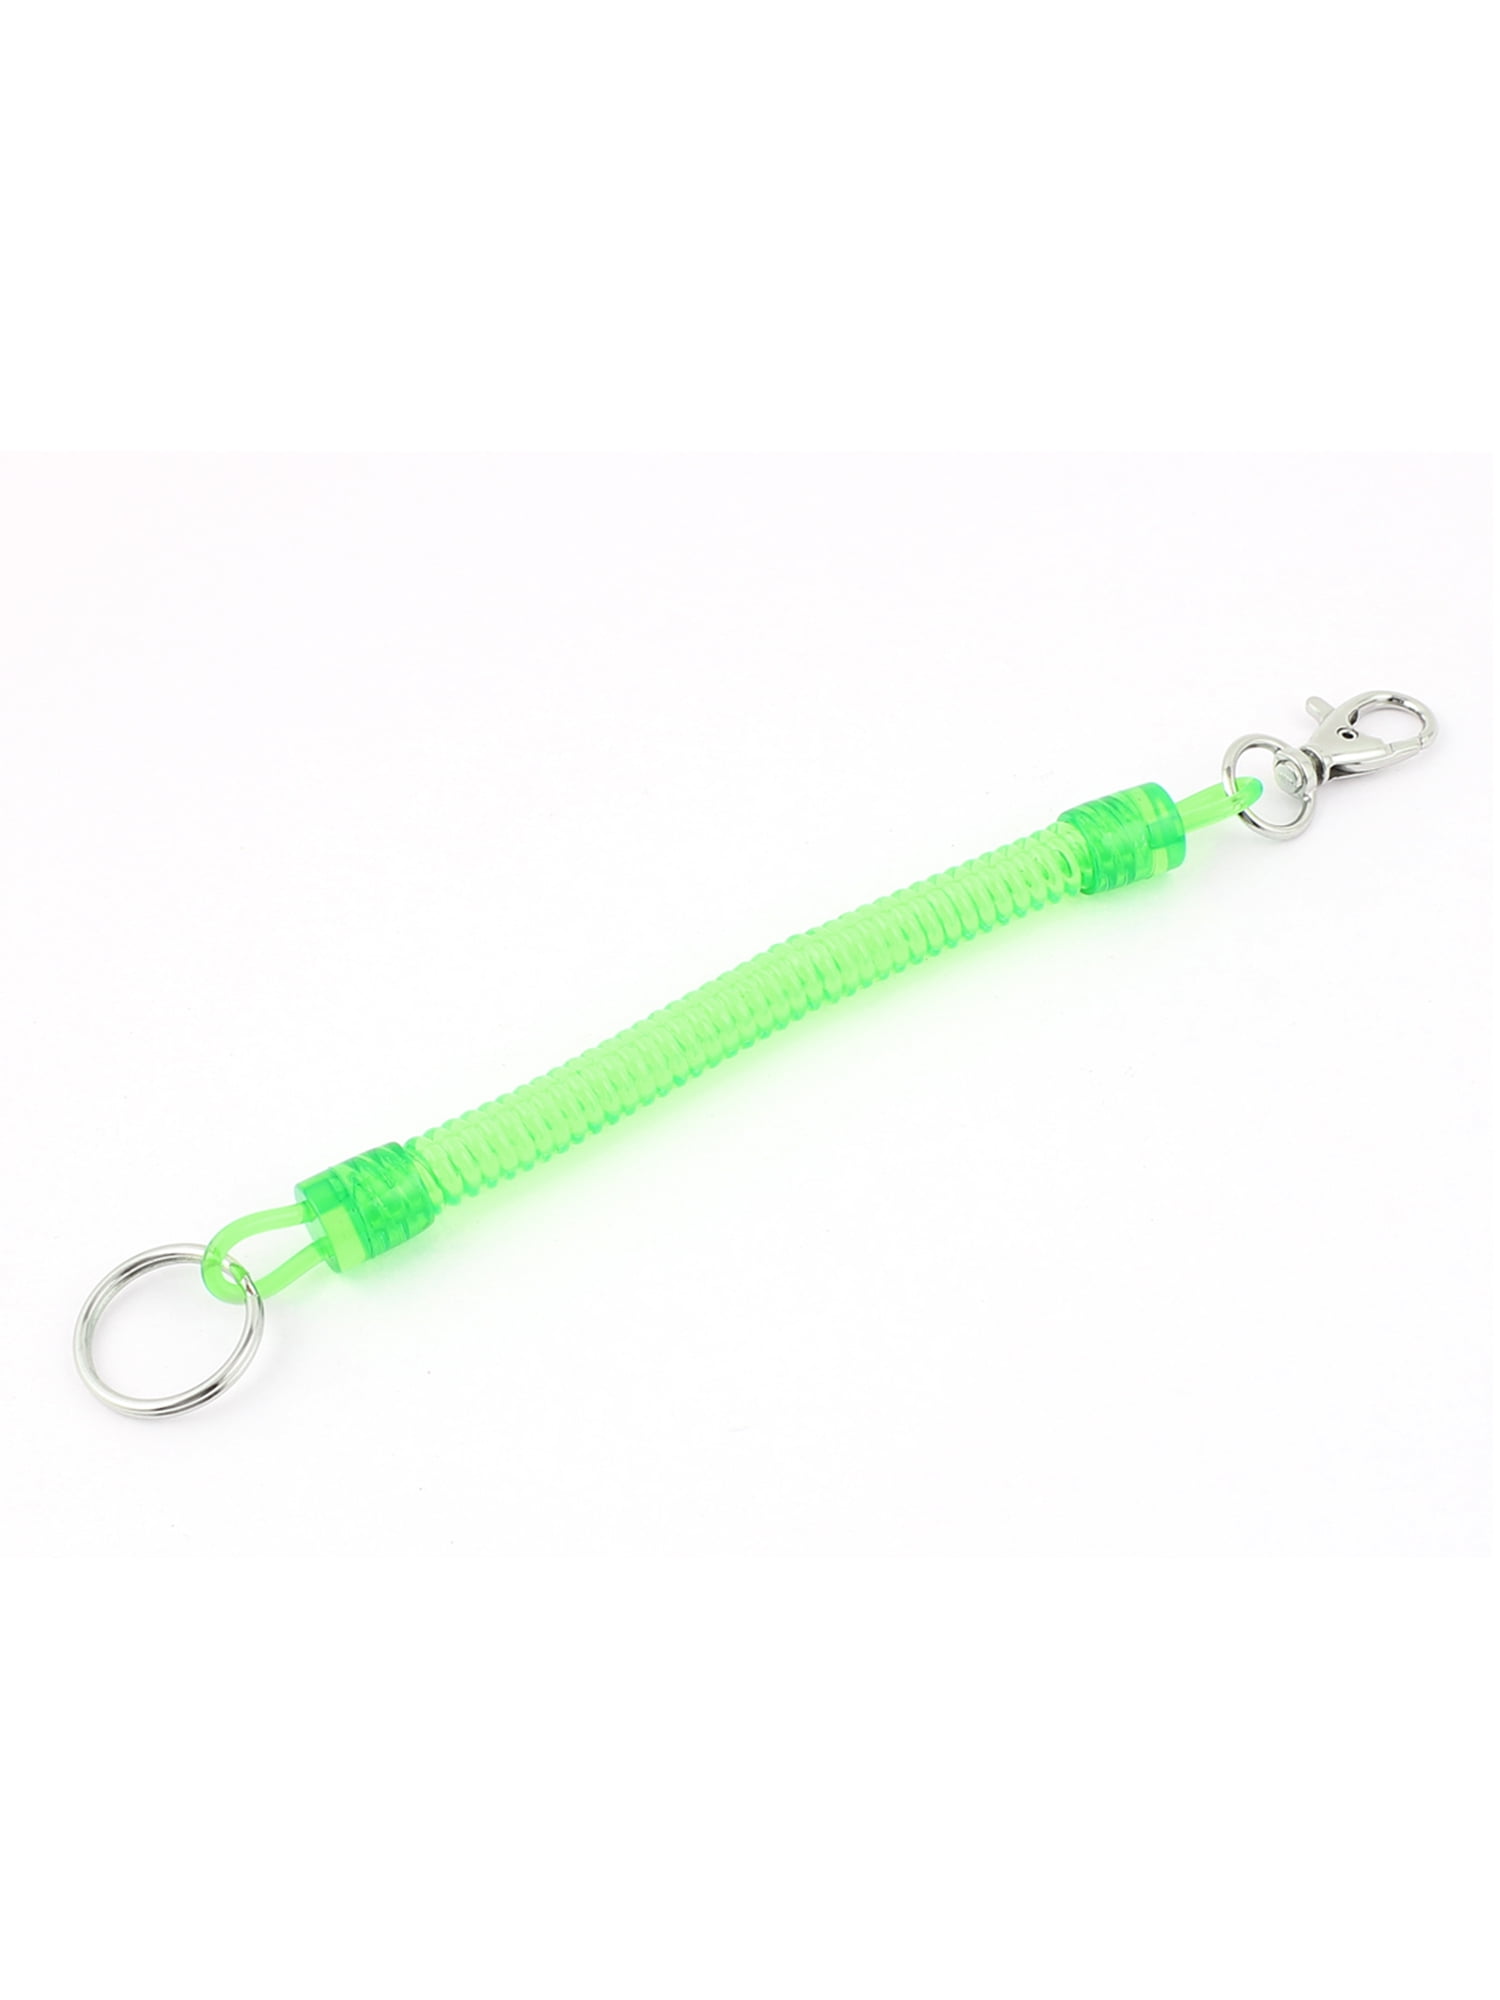 New 4 Pcs  Plastic Wrist Coil With Key Holder Orange Green or Red 